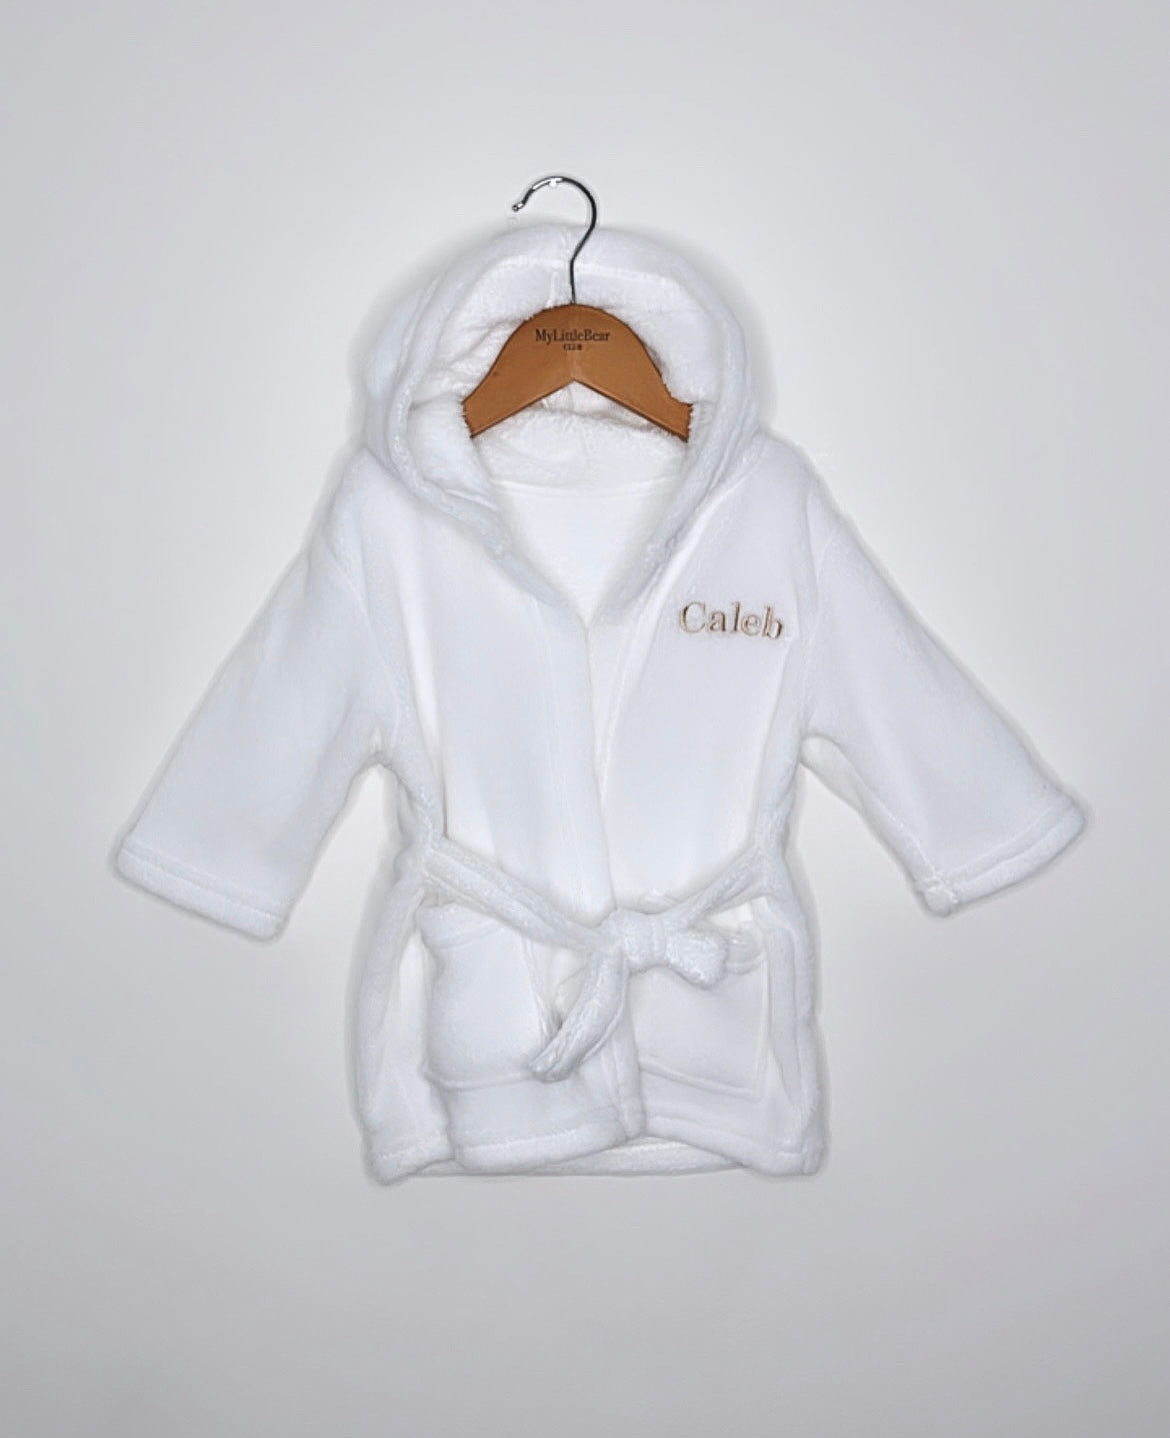 Personalised Baby Dressing Gown